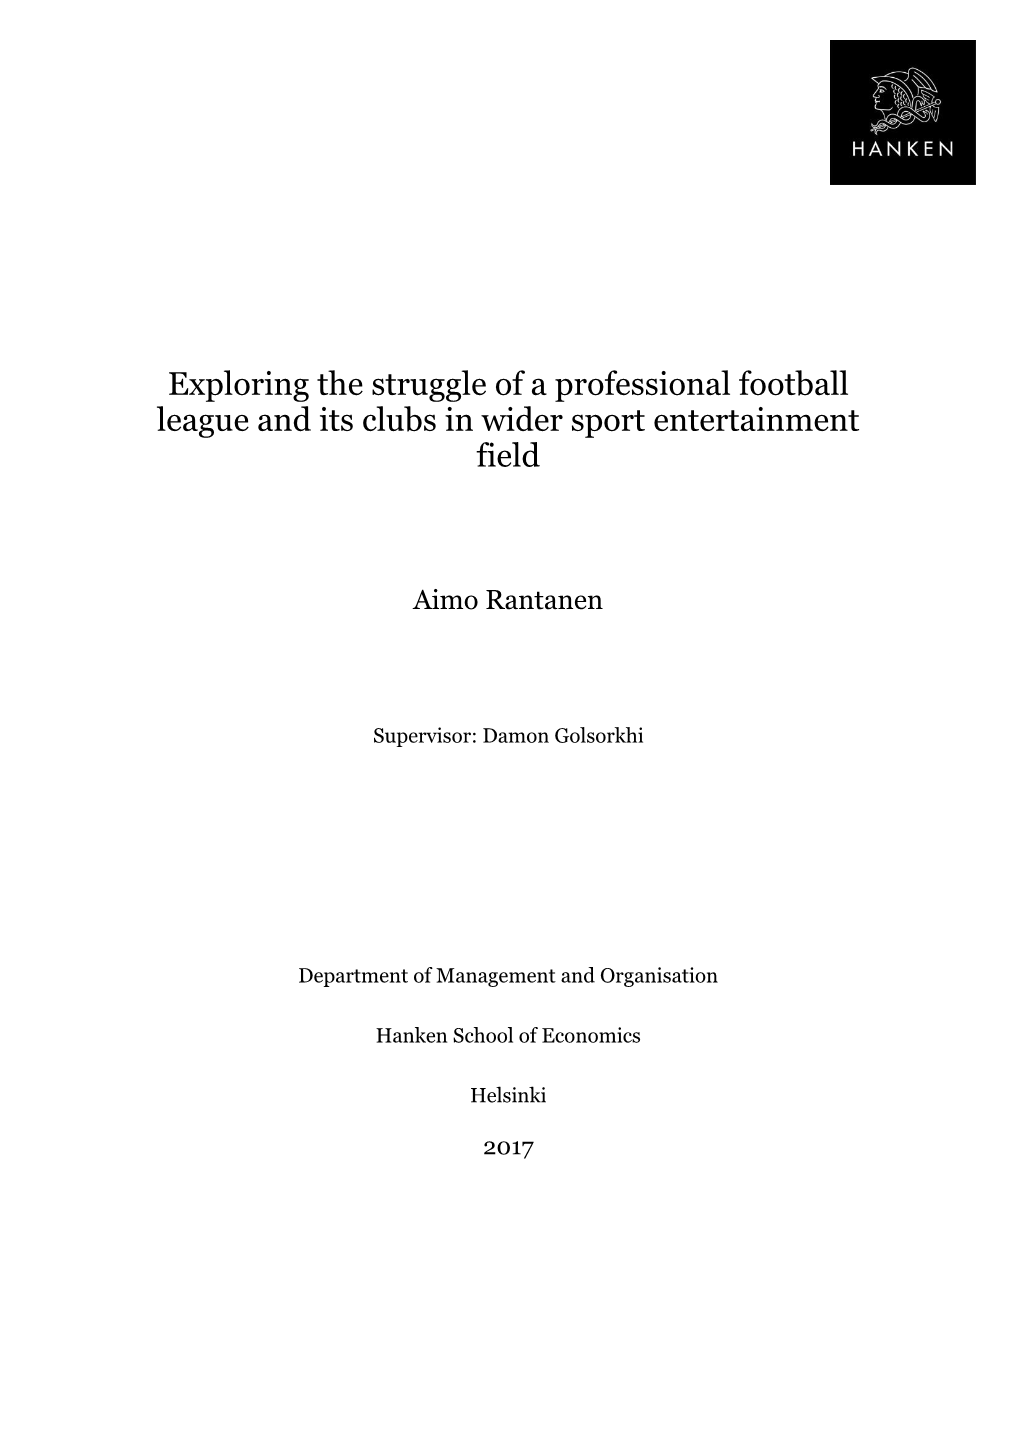 Exploring the Struggle of a Professional Football League and Its Clubs in Wider Sport Entertainment Field